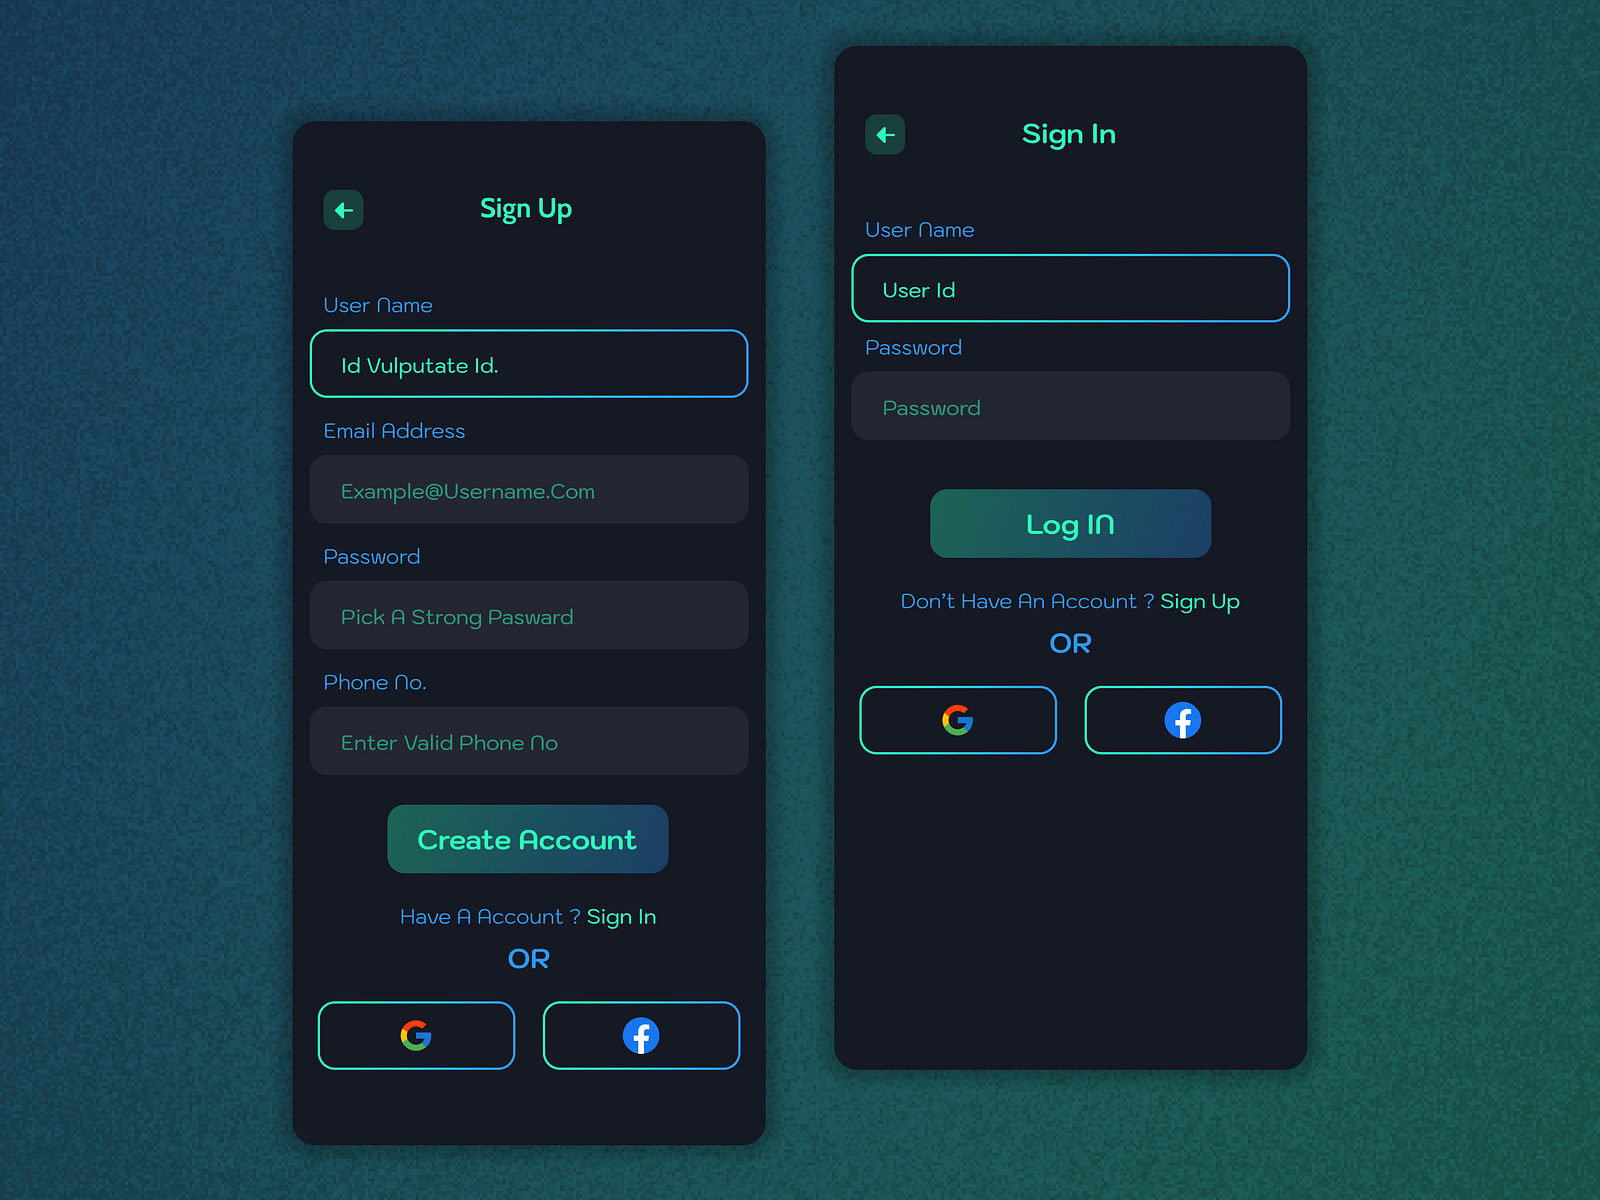 Sign Up UI Design by LYBCOUK on Dribbble